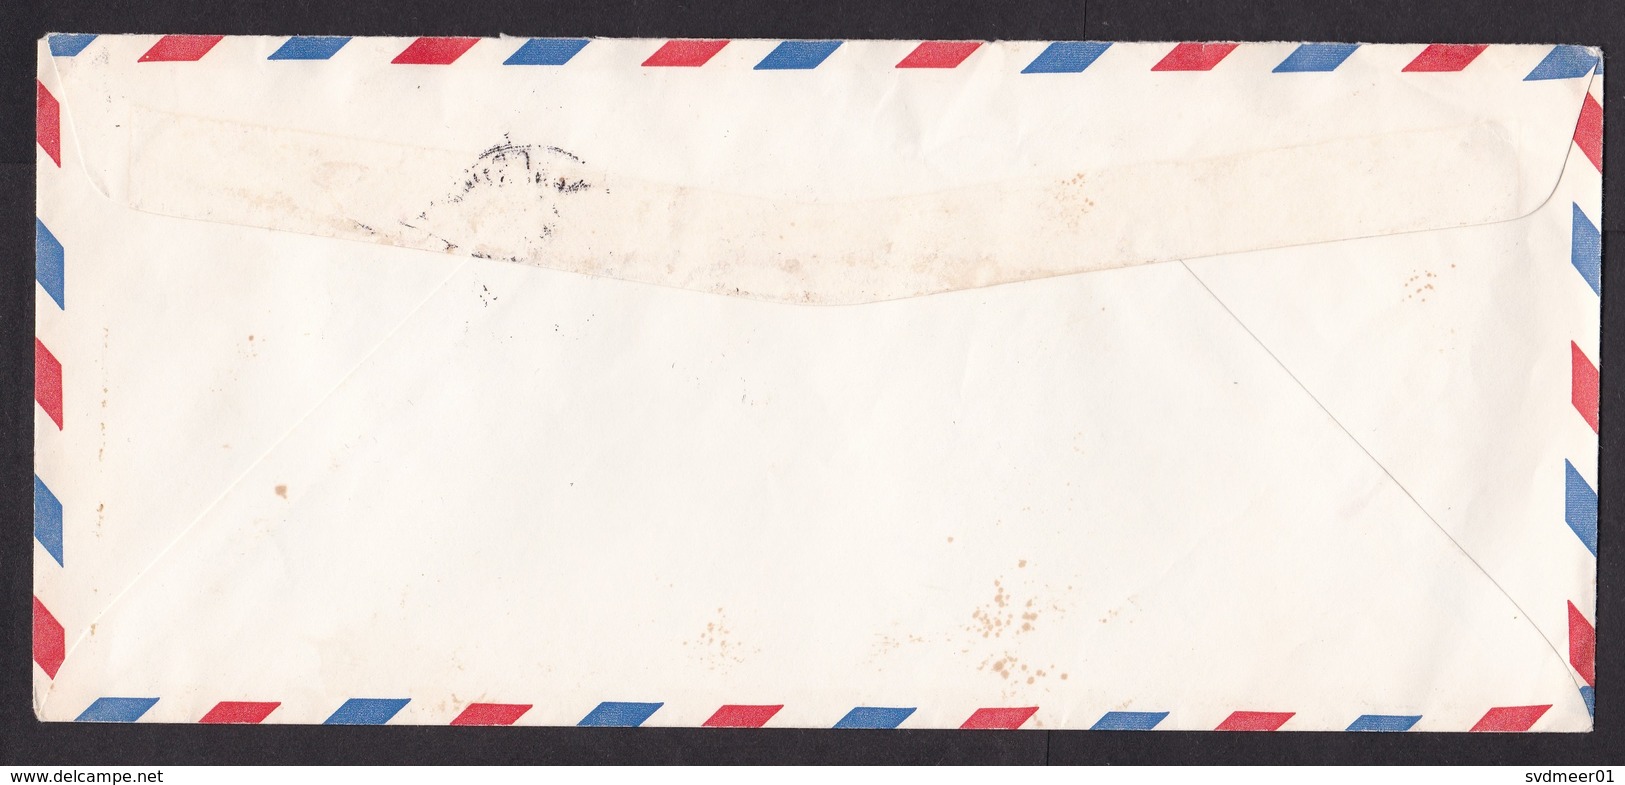 Bahamas: Airmail Cover, 2 Stamps, 1978, Queen Elizabeth II, QEII, Grouper Fish, Cancel Mangrove Cay (minor Damage) - Bahamas (1973-...)